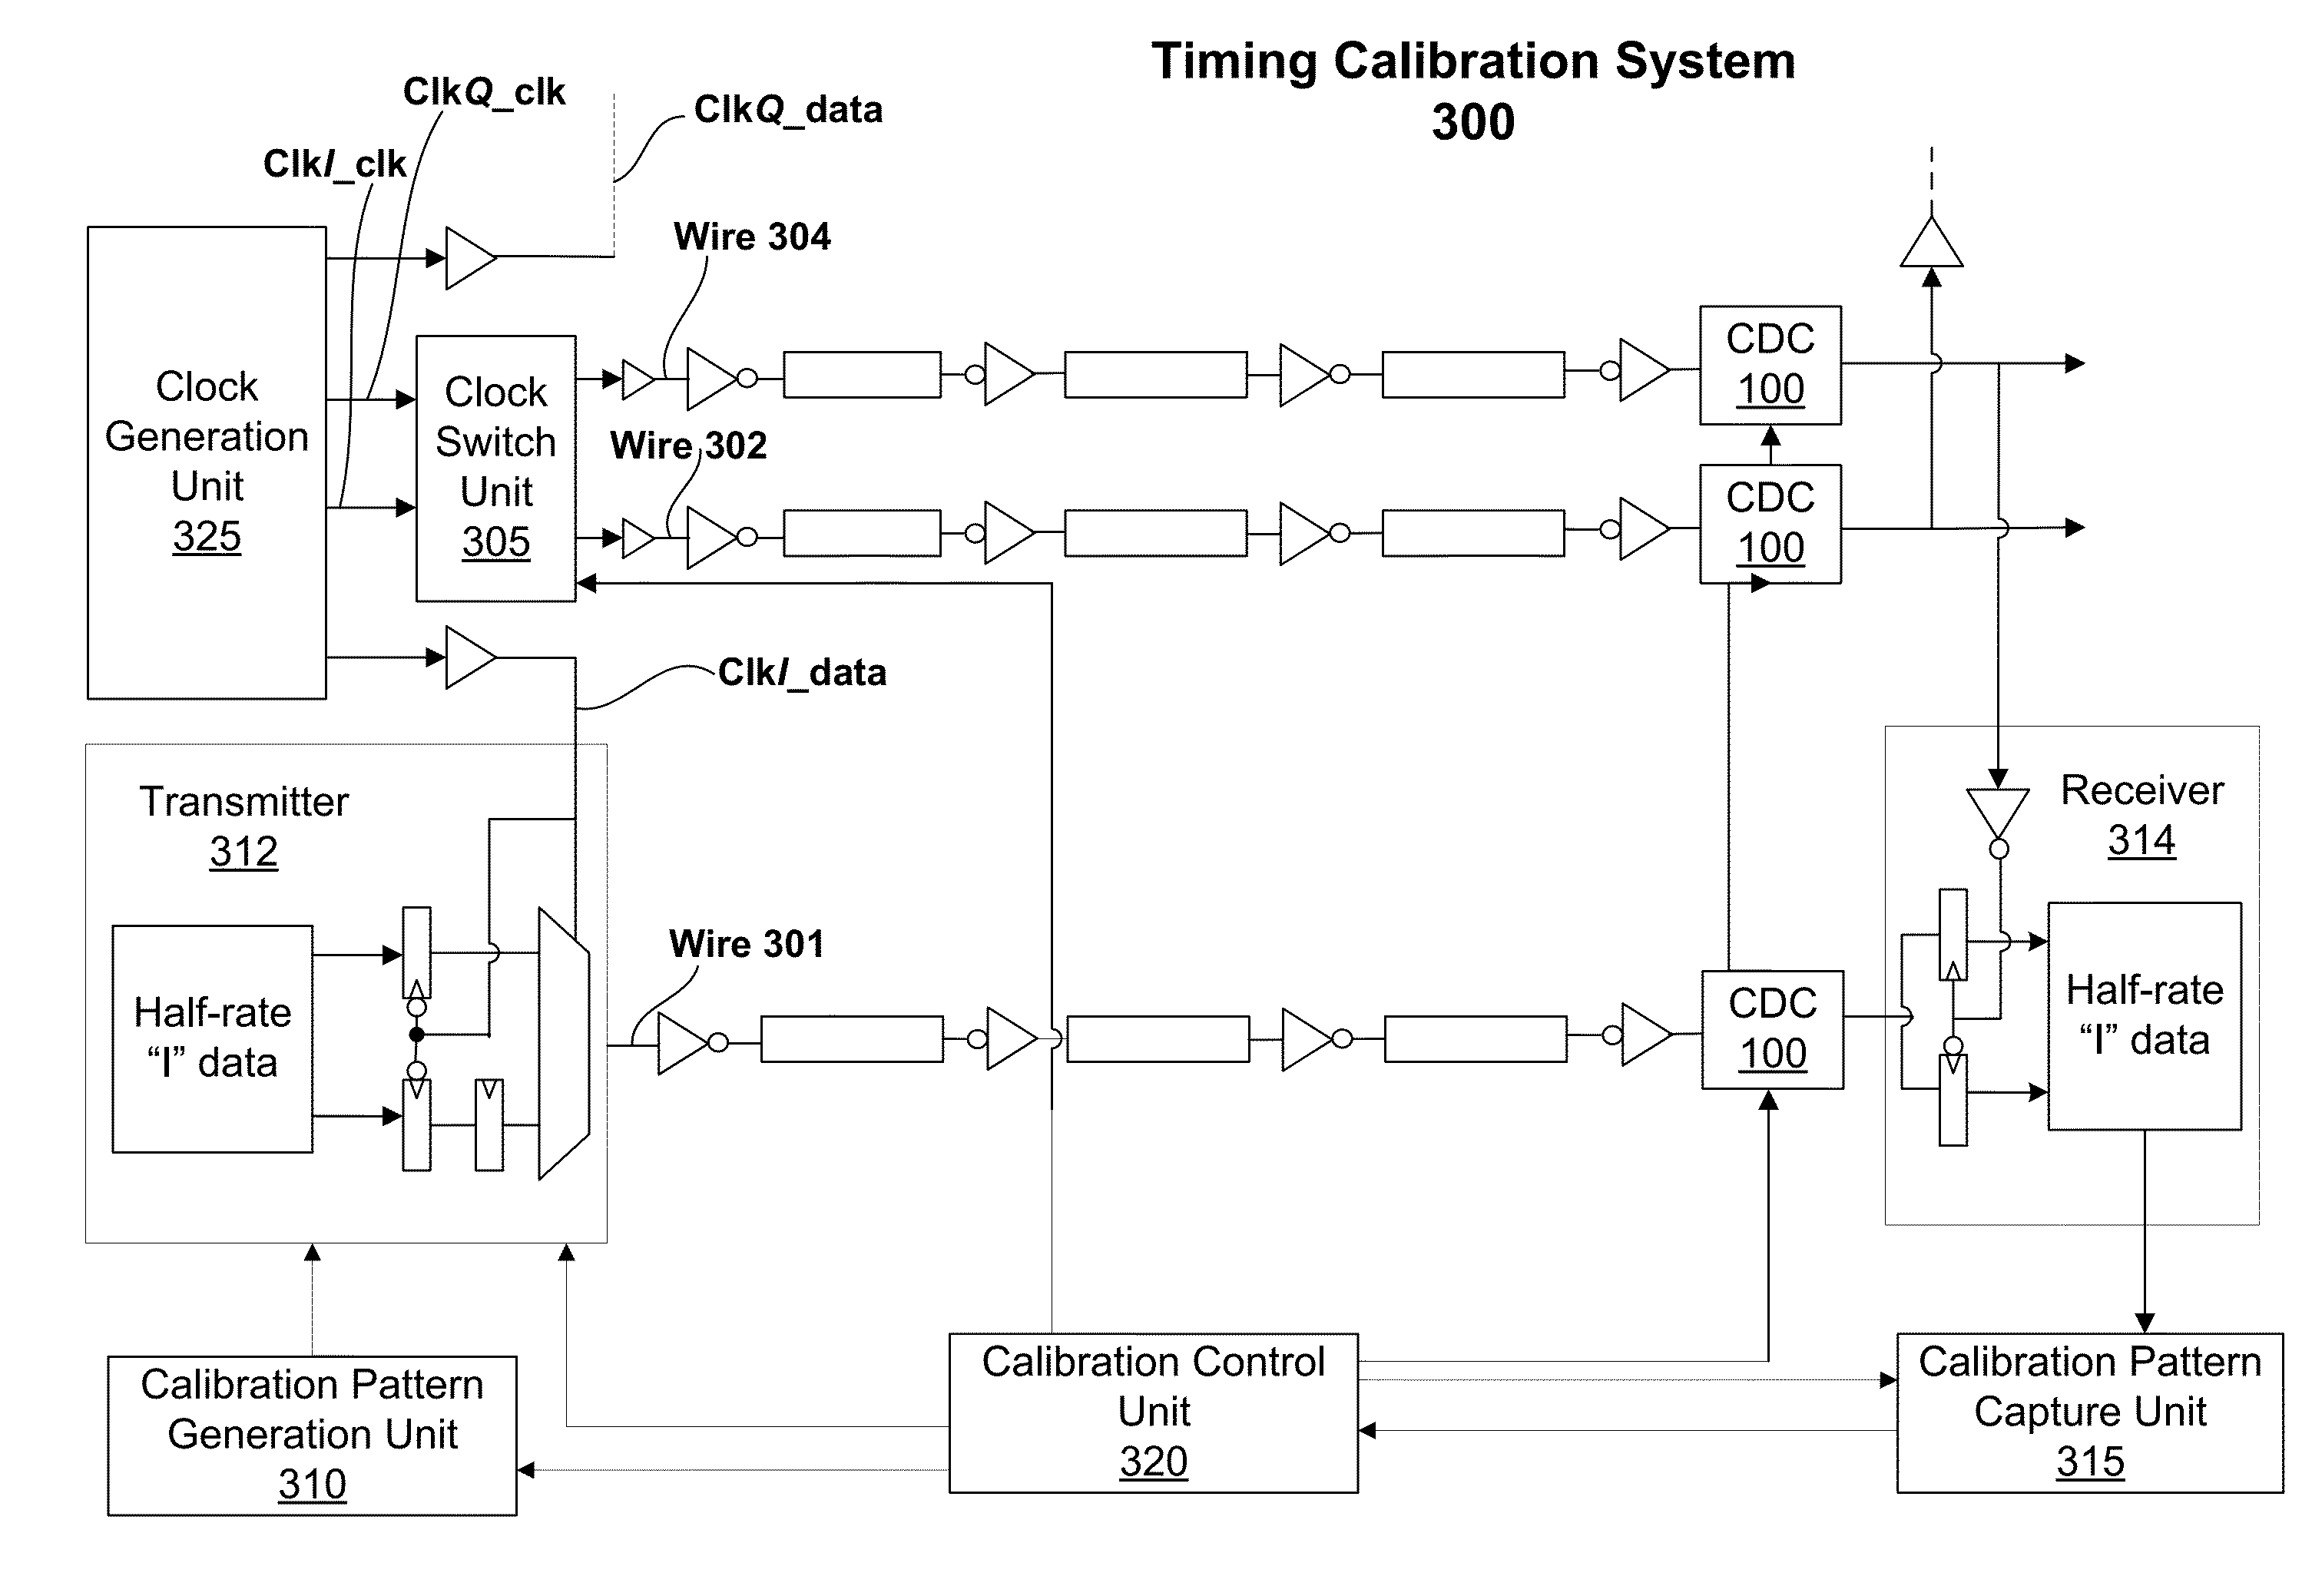 Timing calibration for on-chip interconnect